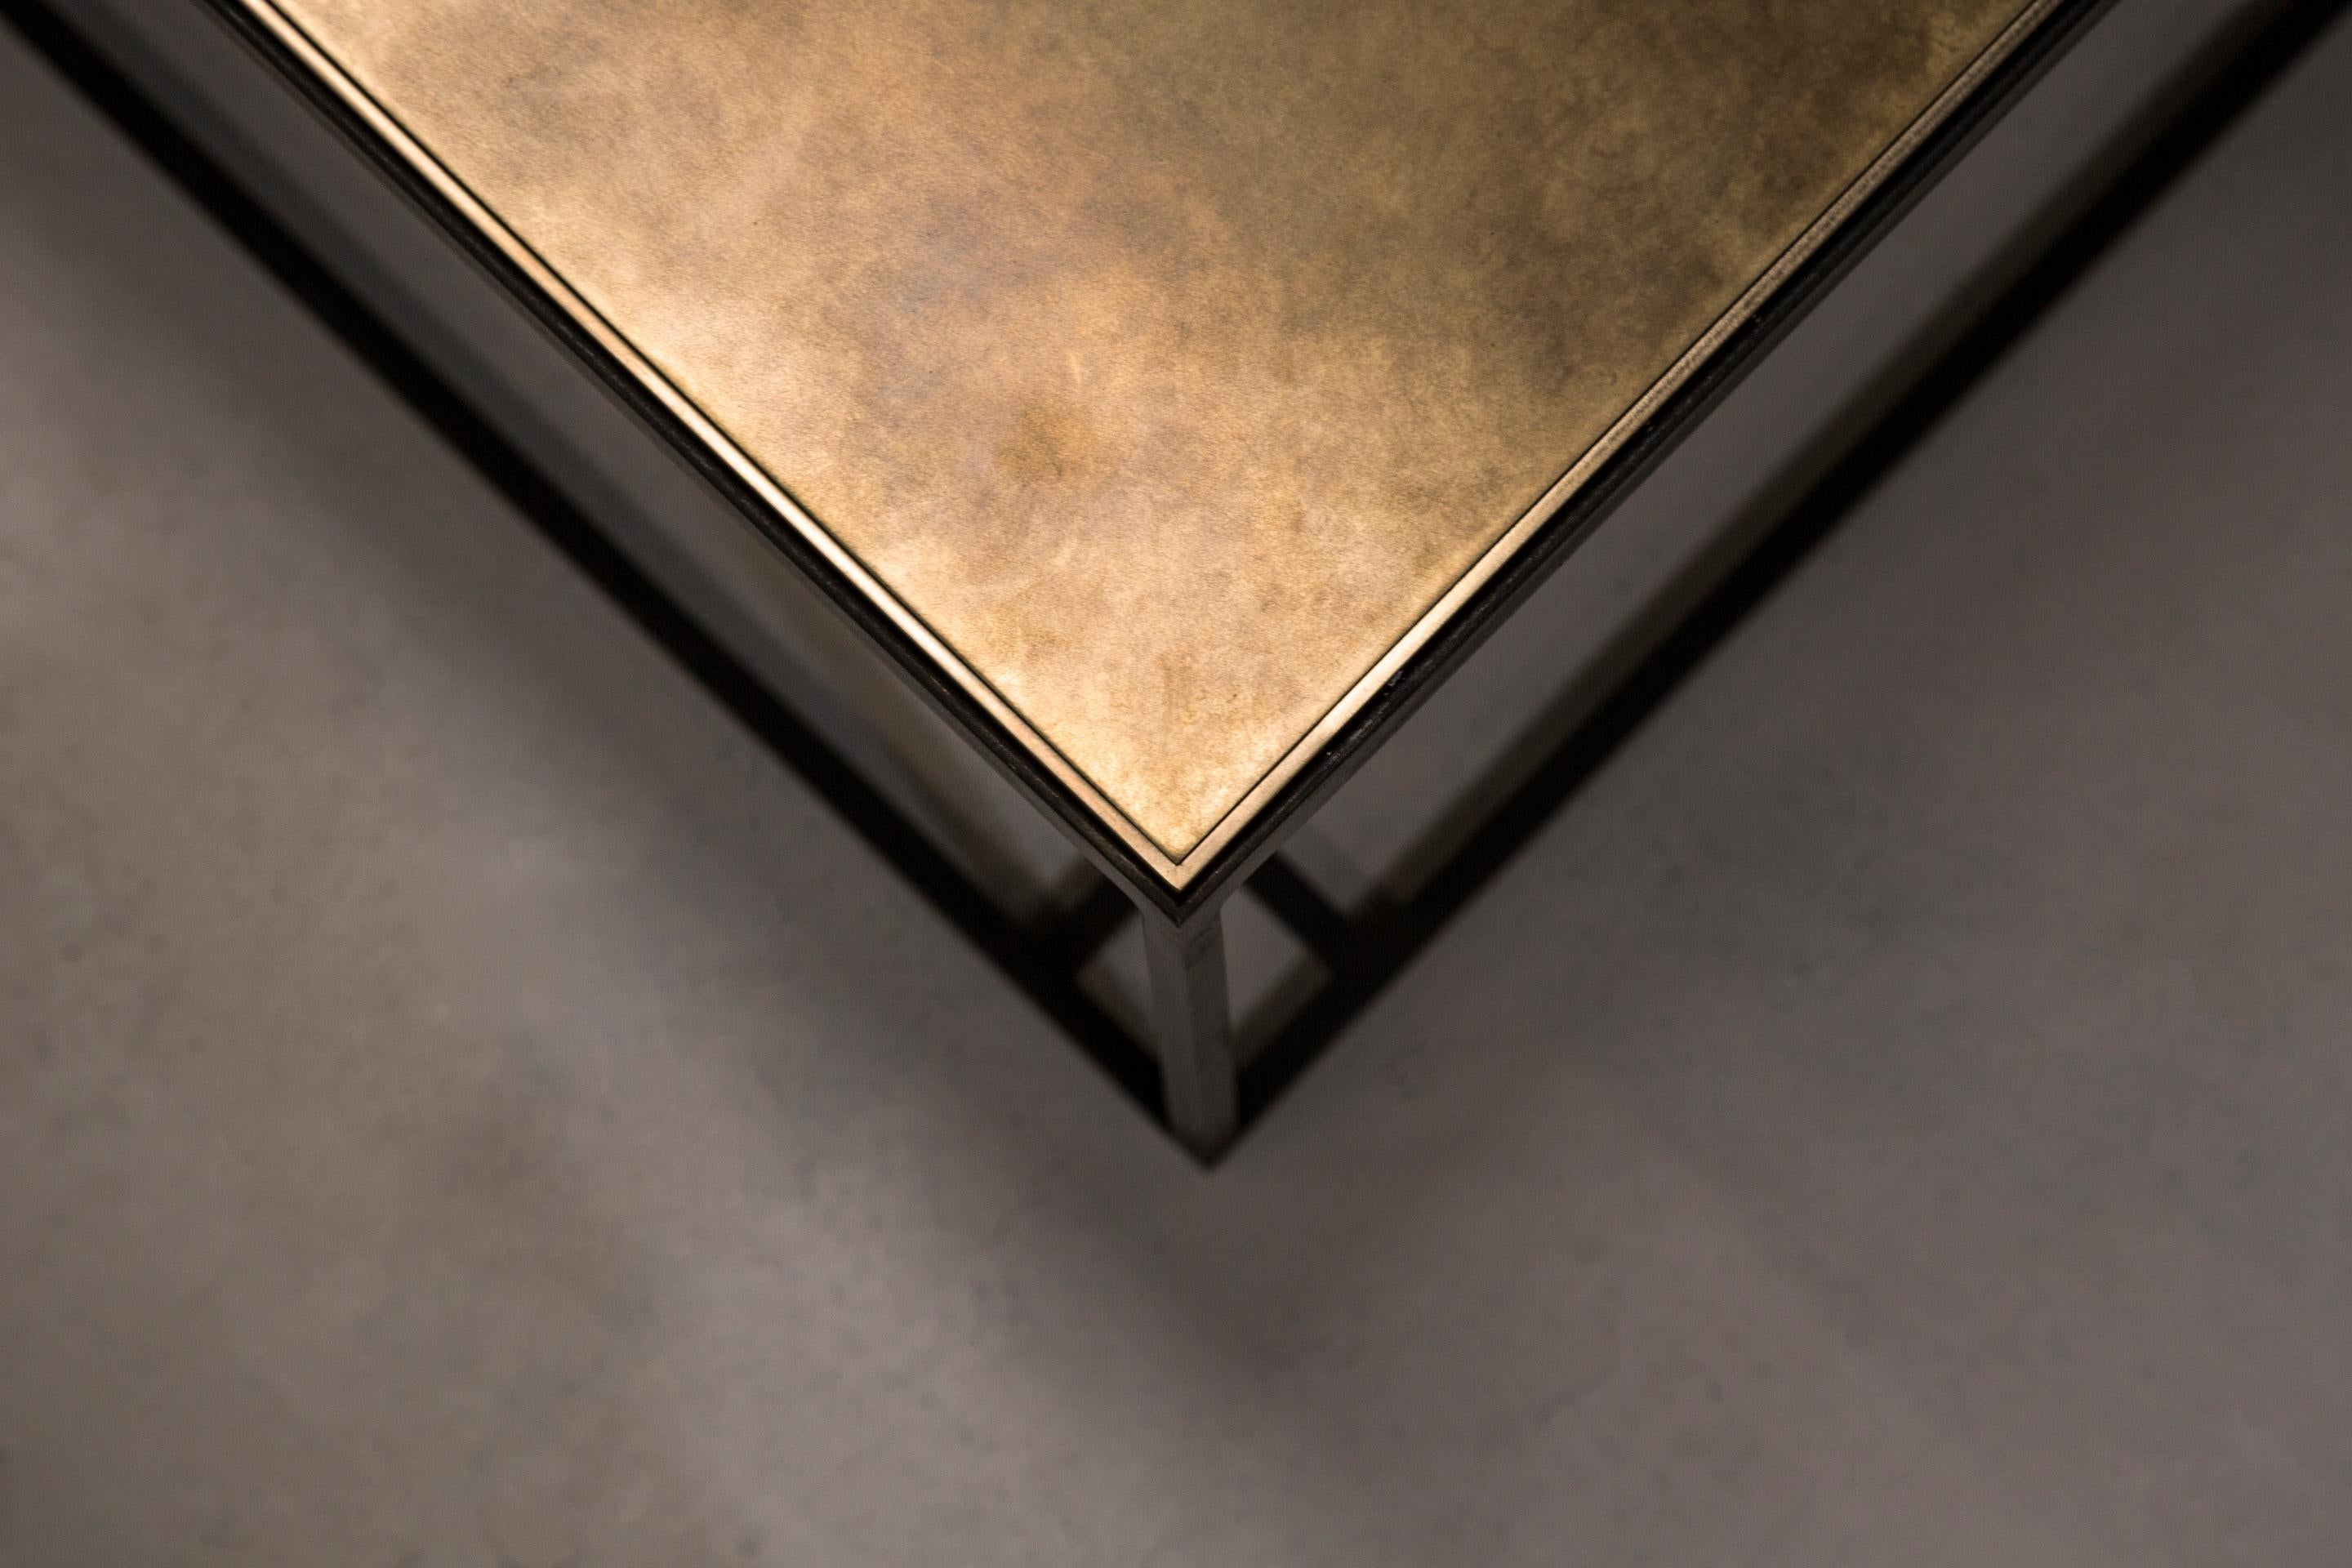 Large Brass and Steel Handcrafted Coffee Table and Signed by Novocastrian
Materials: Patinated Brass, Ultra Light Brass
Measures: 160cm (length) x 100cm (width) x 35cm (height).
Custom sizes available.

Novocastrian

We are metalworkers, architects,